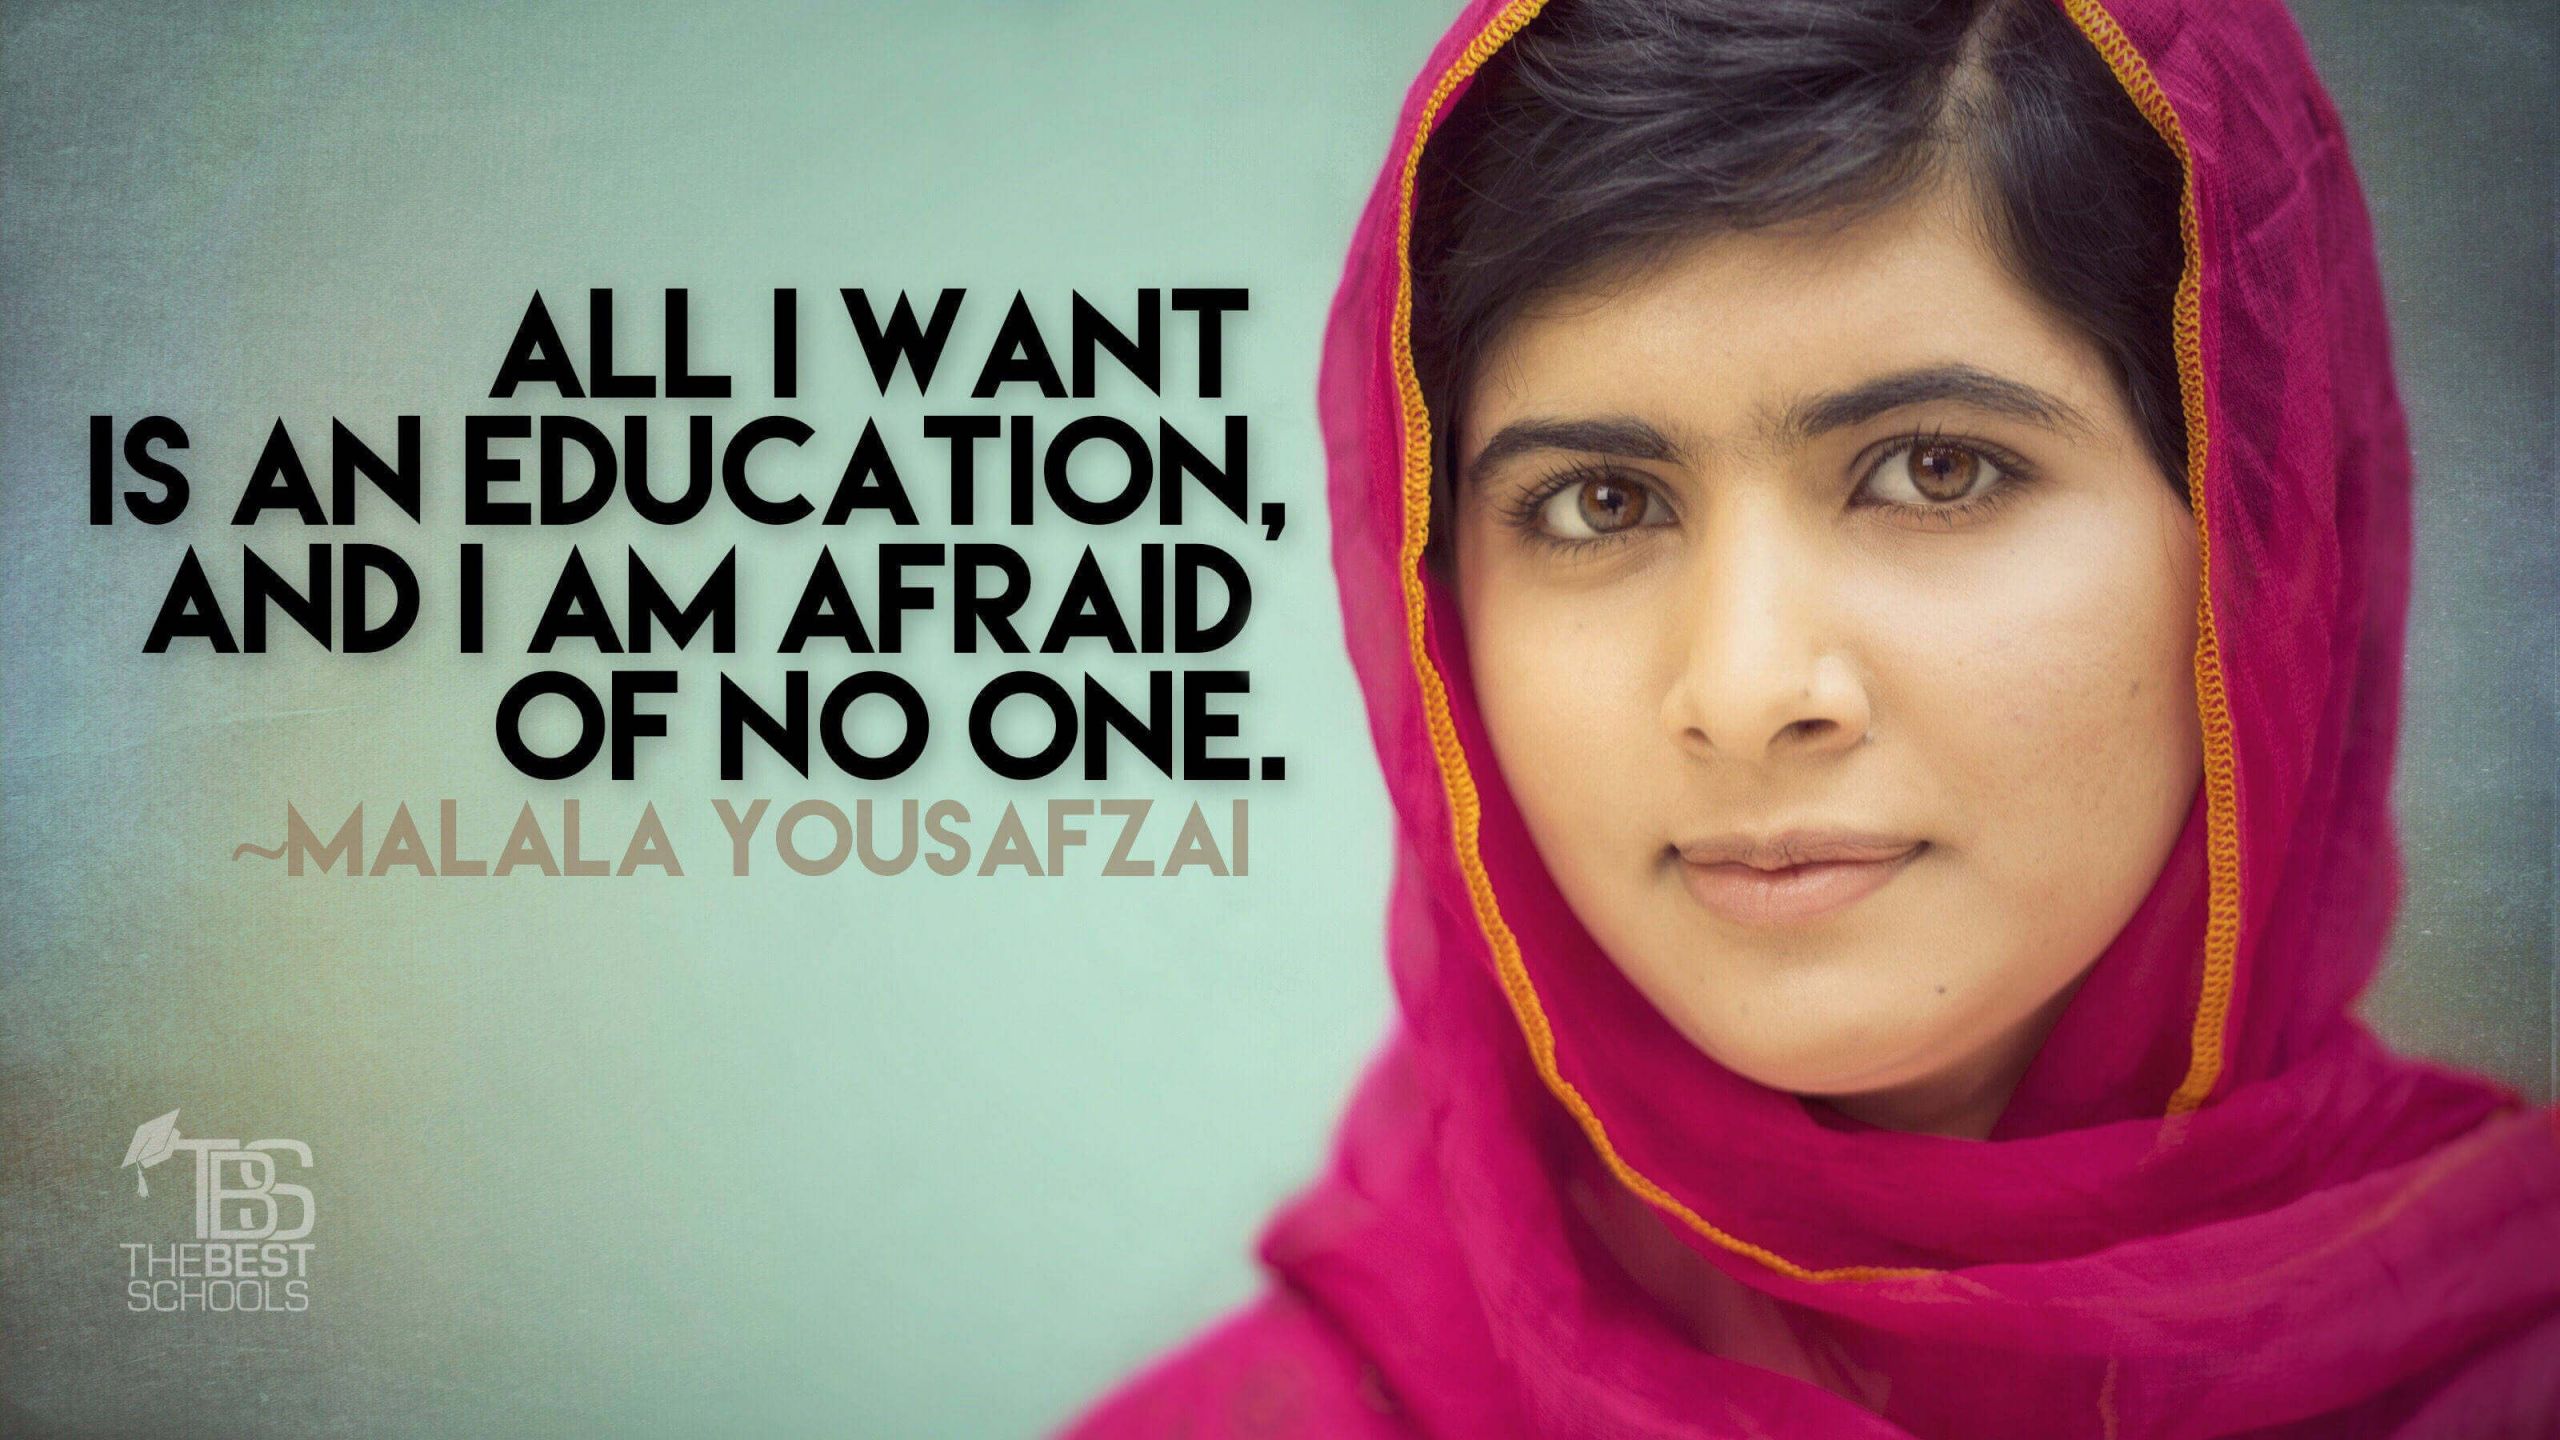 Malala Education Quote
 “5 years ago I was shot Today I attend my first